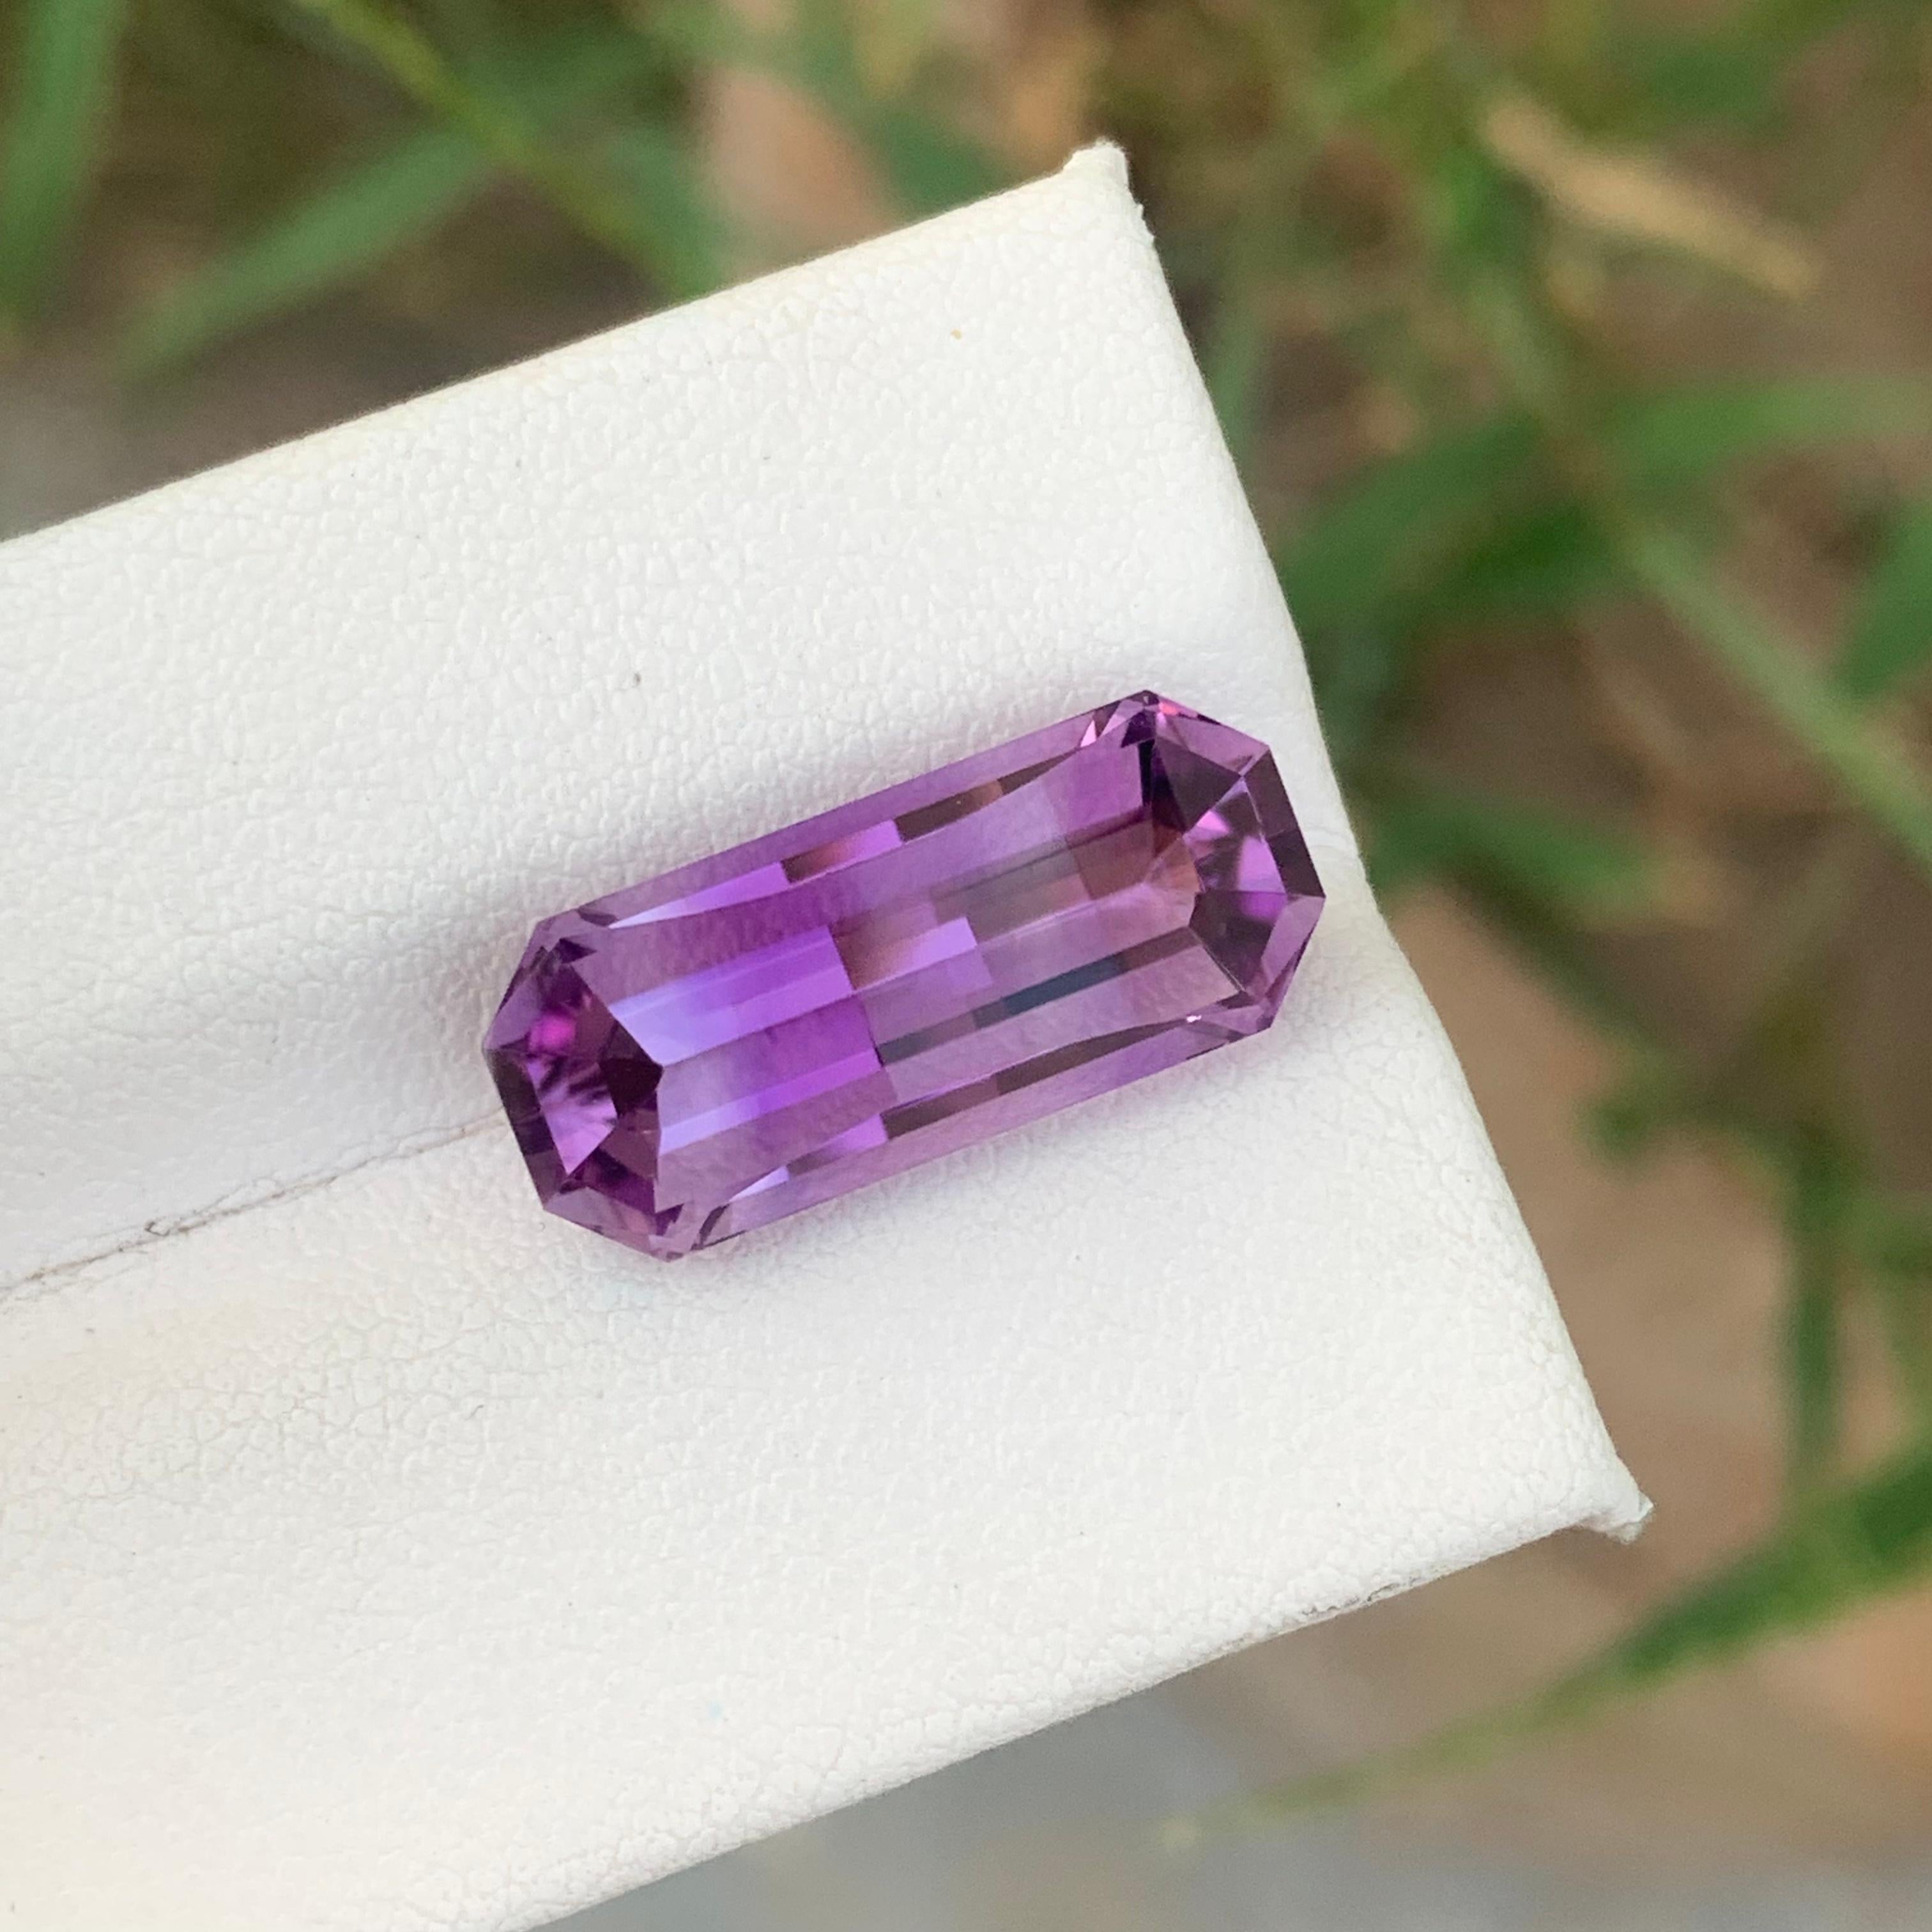 8.25cts Natural Loose Amethyst Gemstone Pixel Pixelated Cut From Brazil Mine For Sale 9